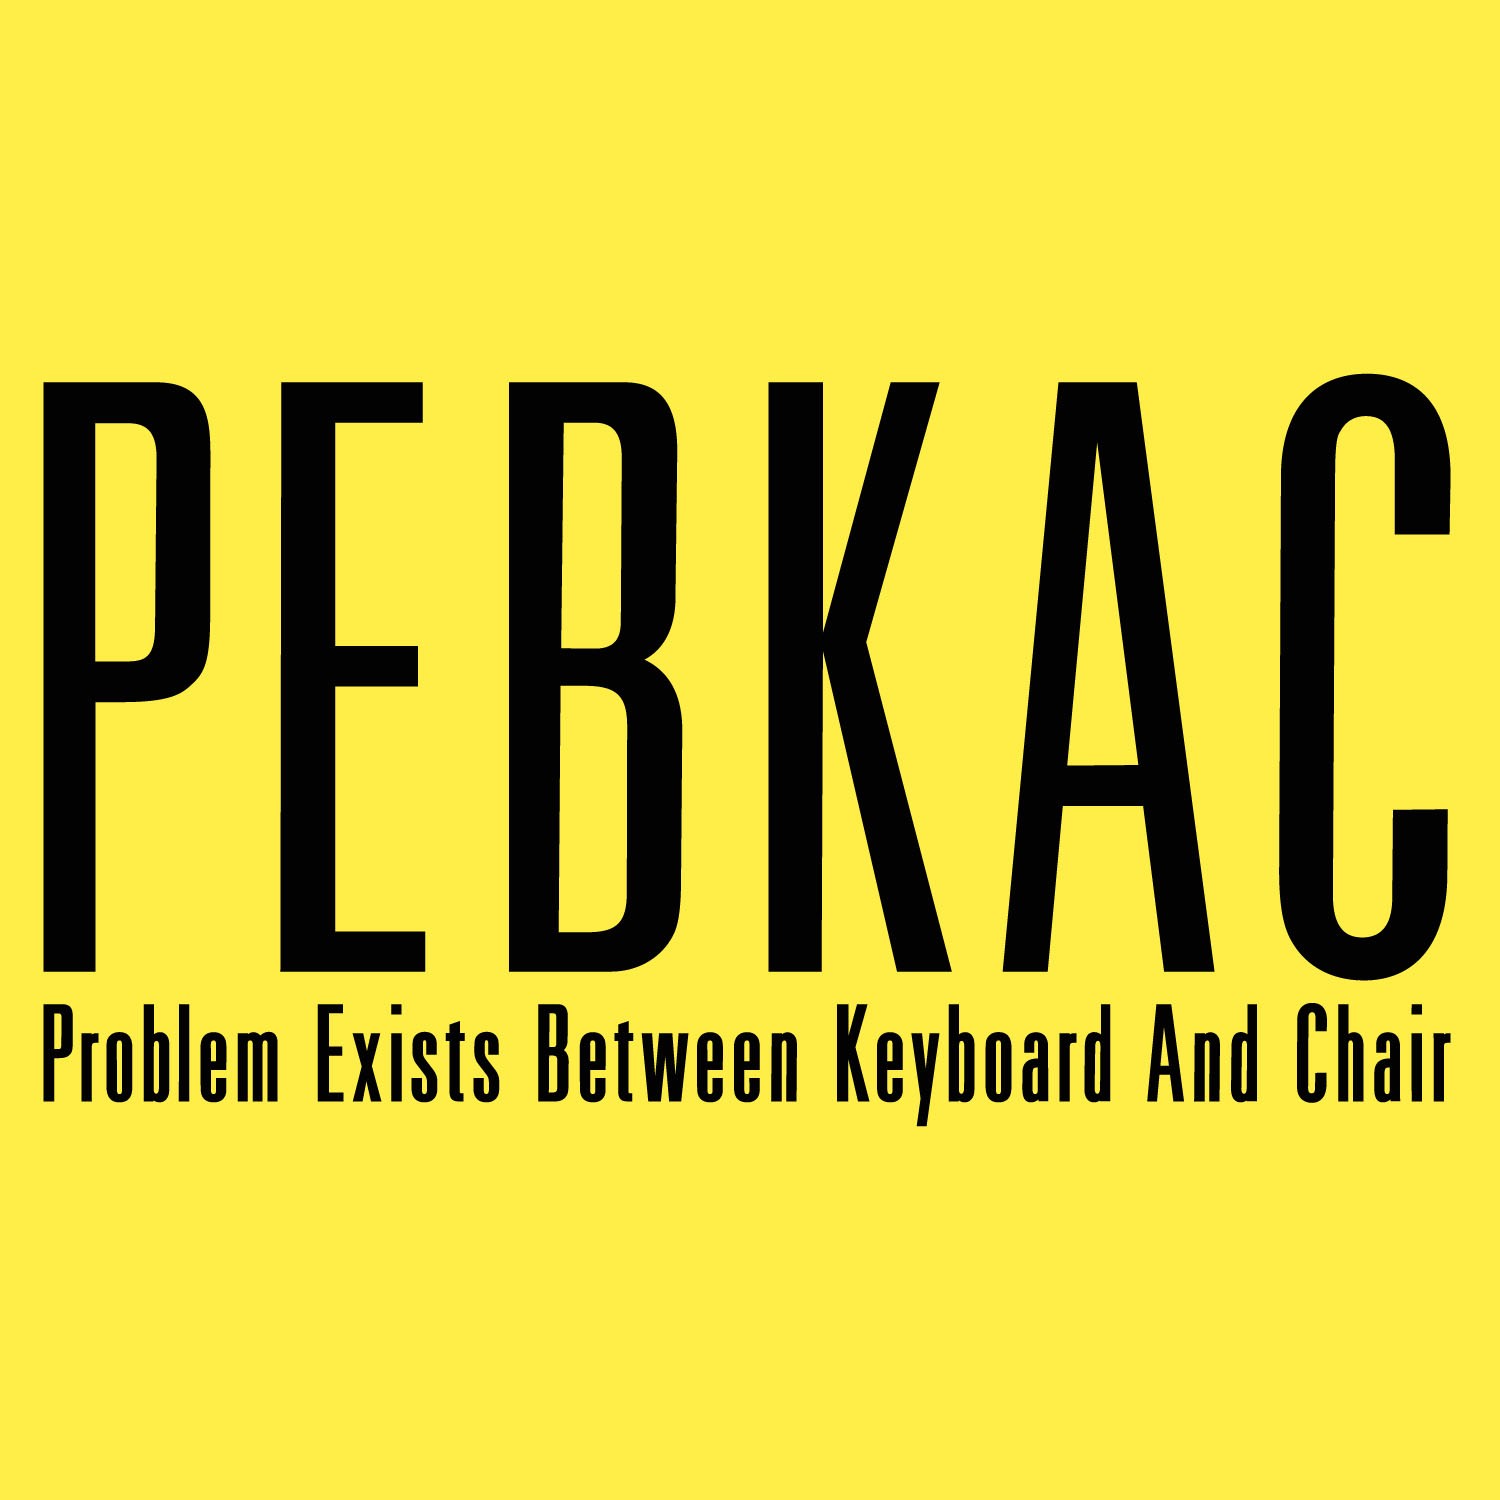 Pebkac Problem Exists Between Keyboard And Chair